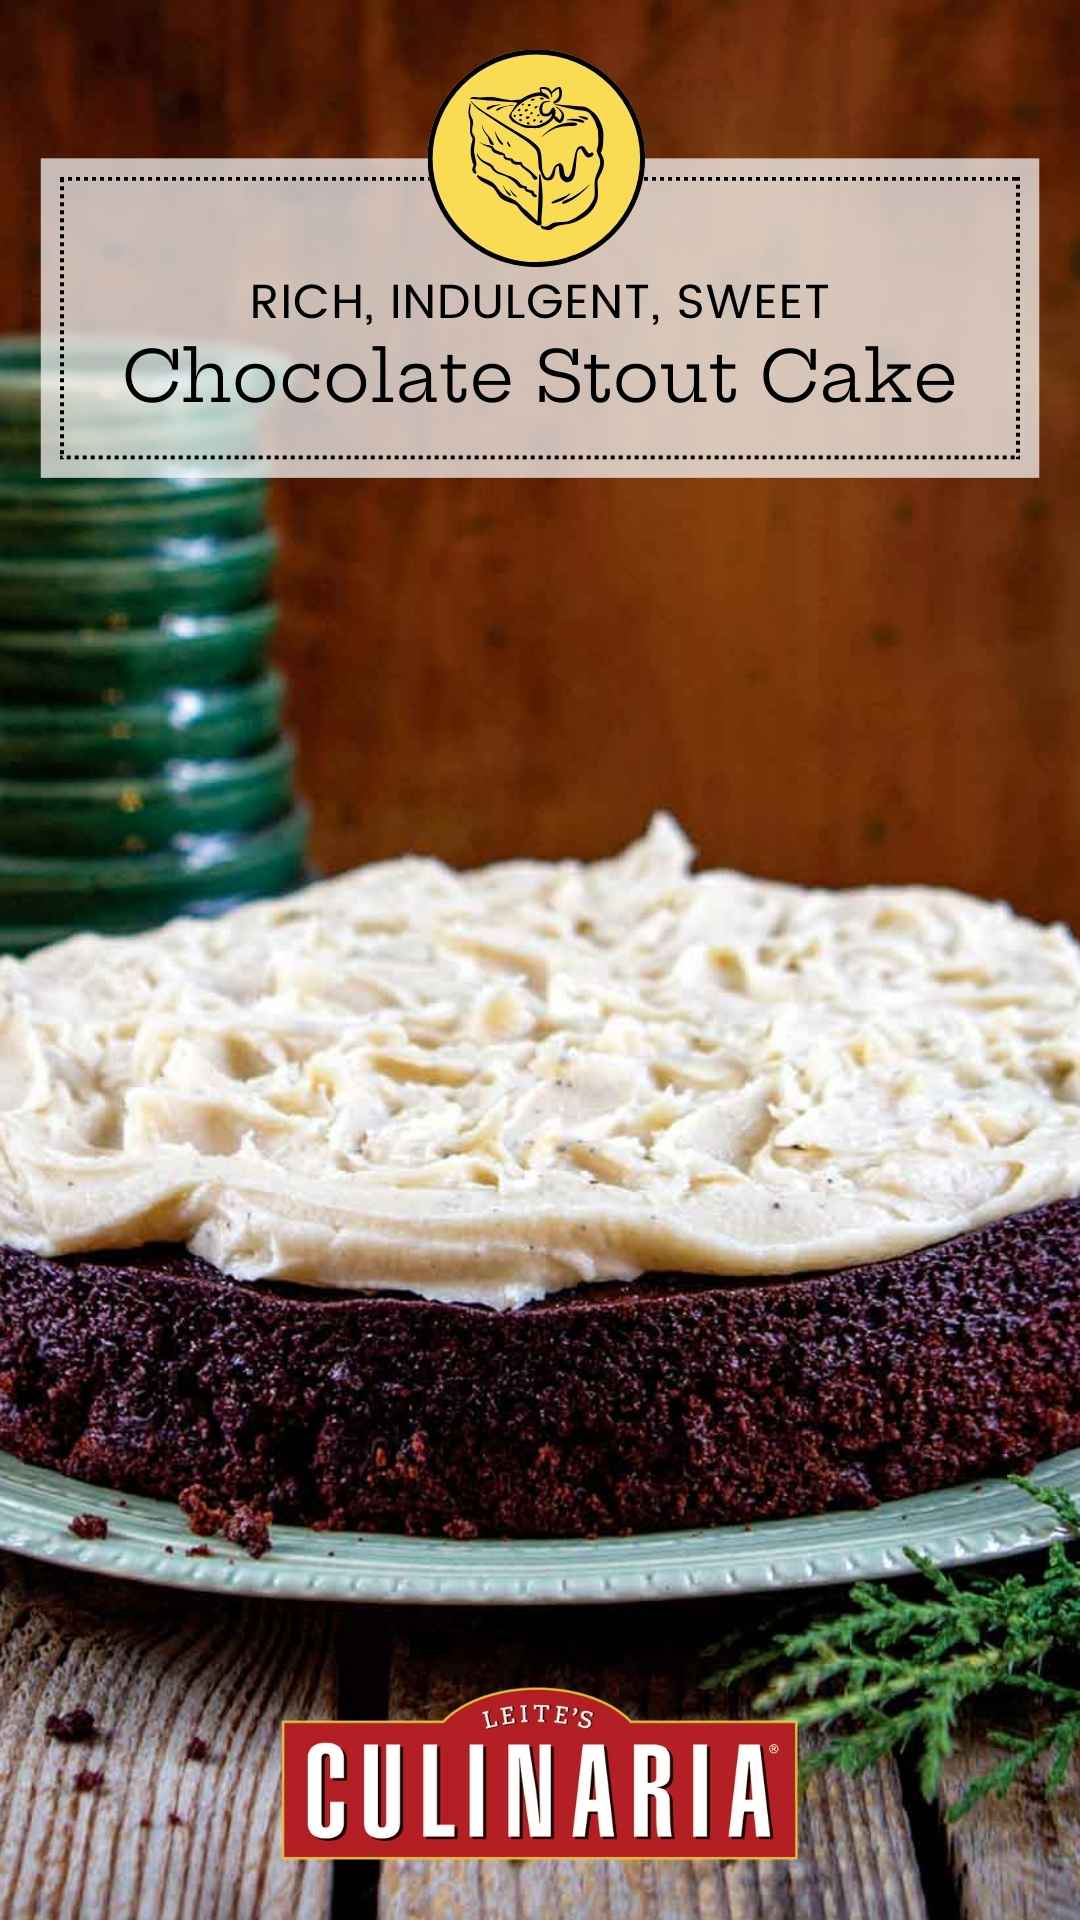 A chocolate cake topped with cream cheese frosting on a green plate.